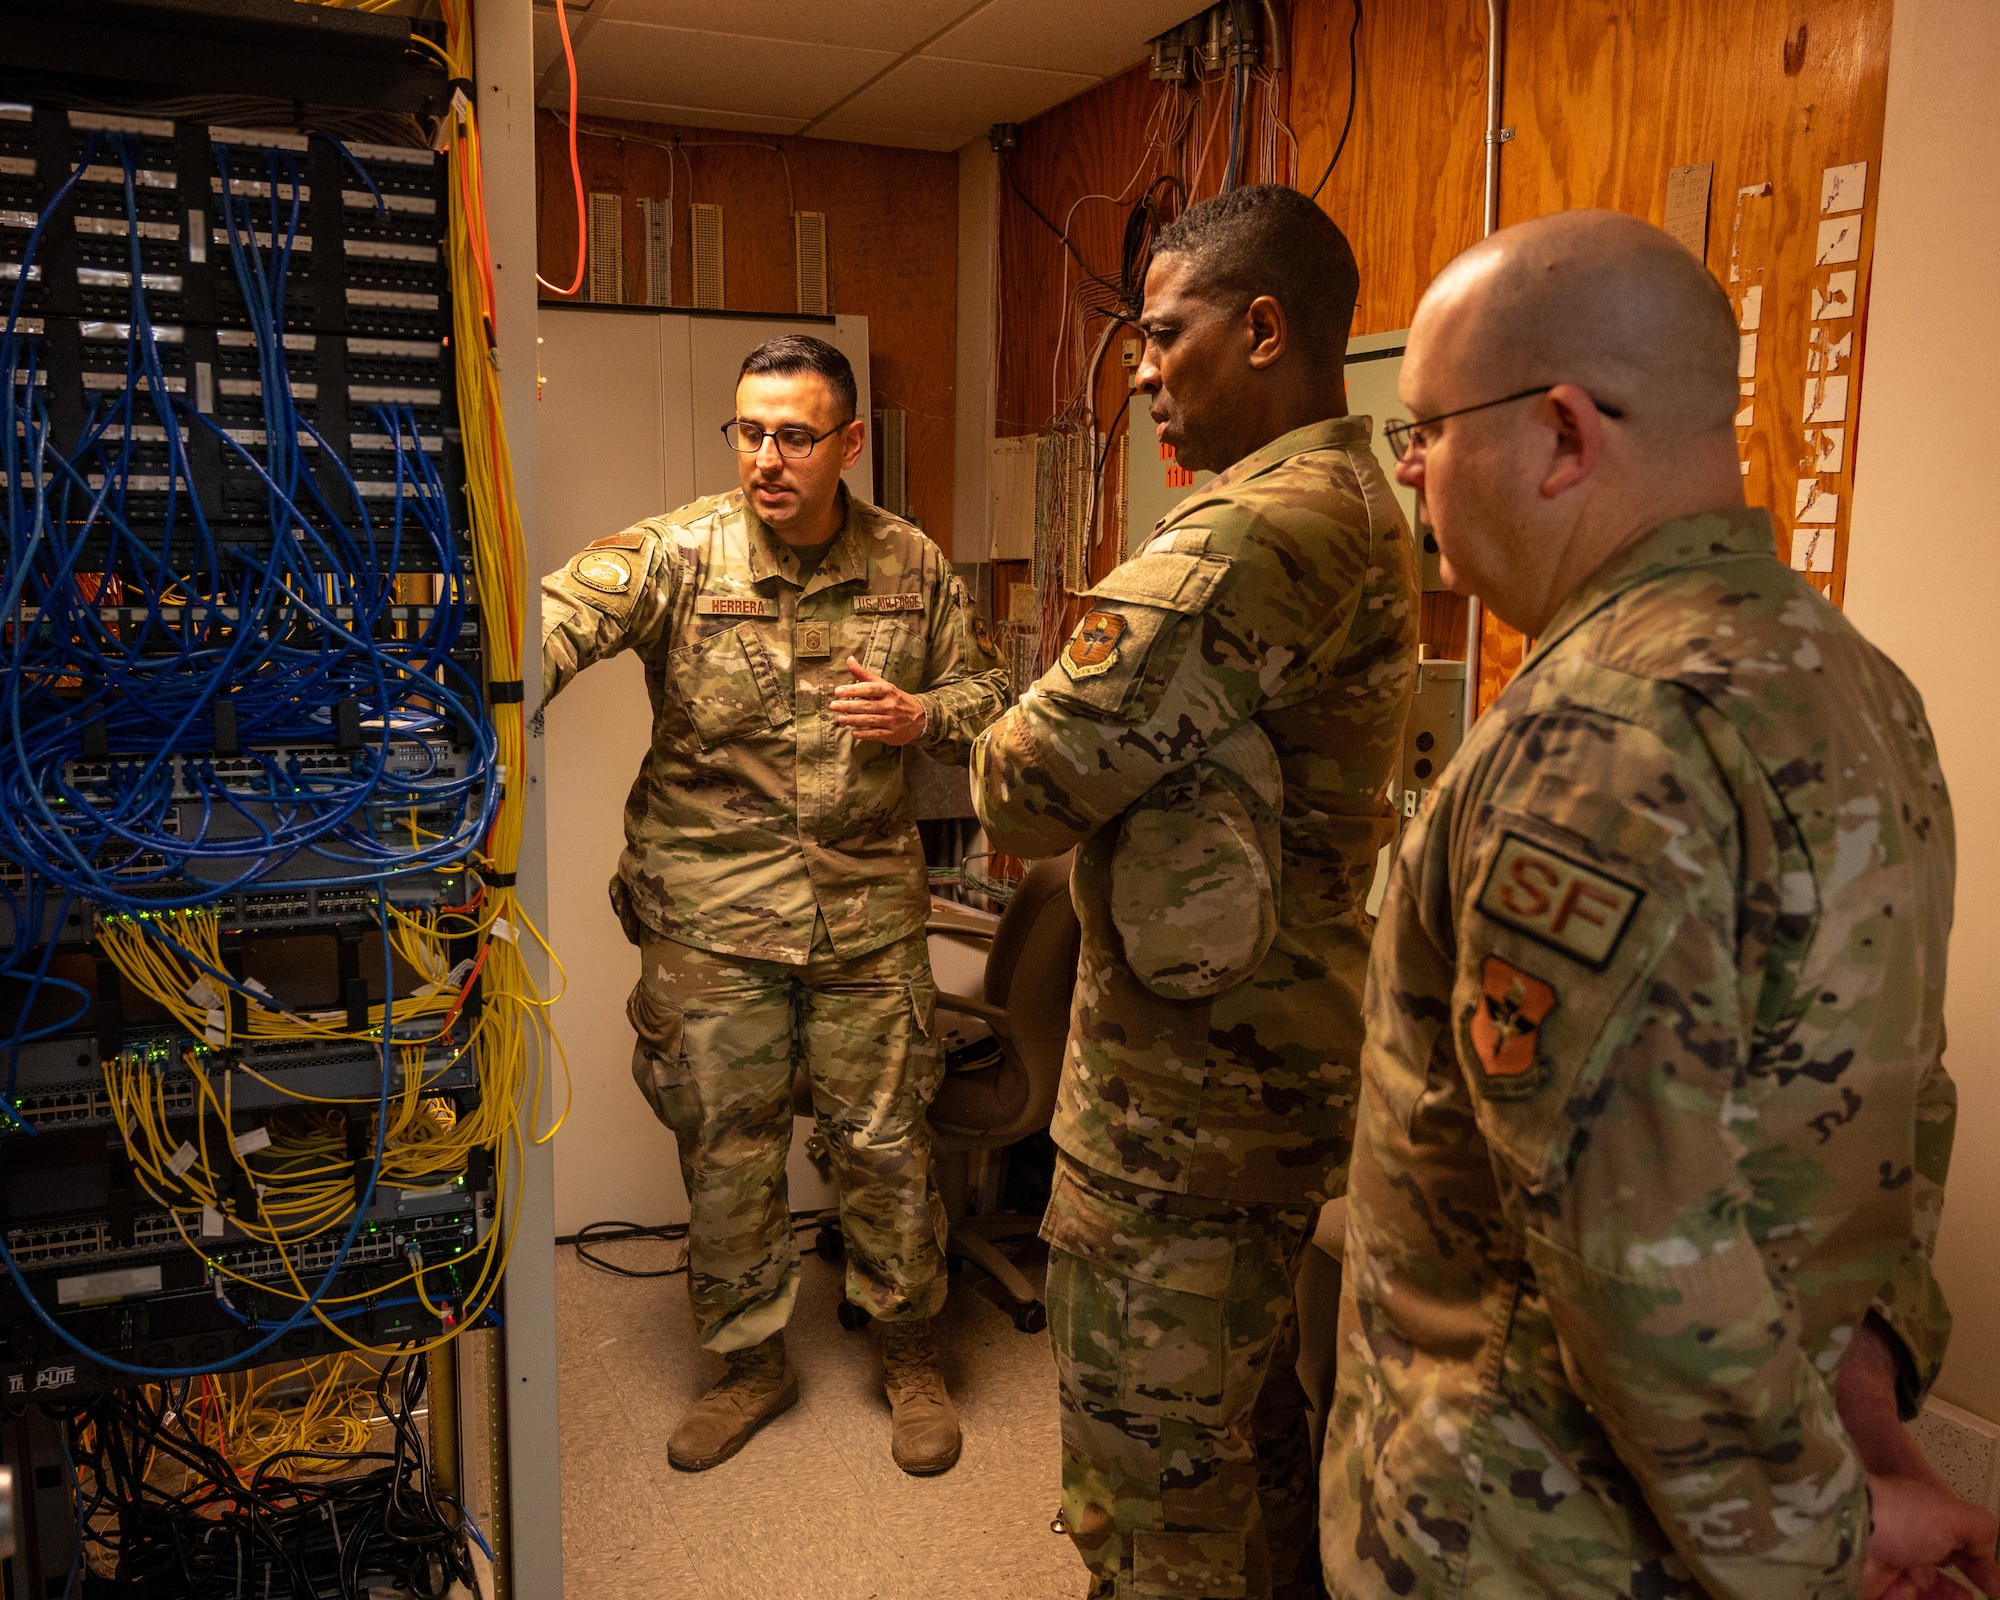 U.S. Air Force Master Sgt. David Herrera, 47th Communications Squadron network control center section chief, shows Col. Robert Moore, 47th Mission Support Group (MSG) commander, and Chief Master Sgt. Anthony Burleson, 47th MSG command chief, improvements being made to the servers at Laughlin Air Force Base, Texas, Feb. 6, 2024. Server improvements allow for faster data flows and more secure information transfer. (U.S. Air Force photo by Staff Sgt. Nicholas Larsen)